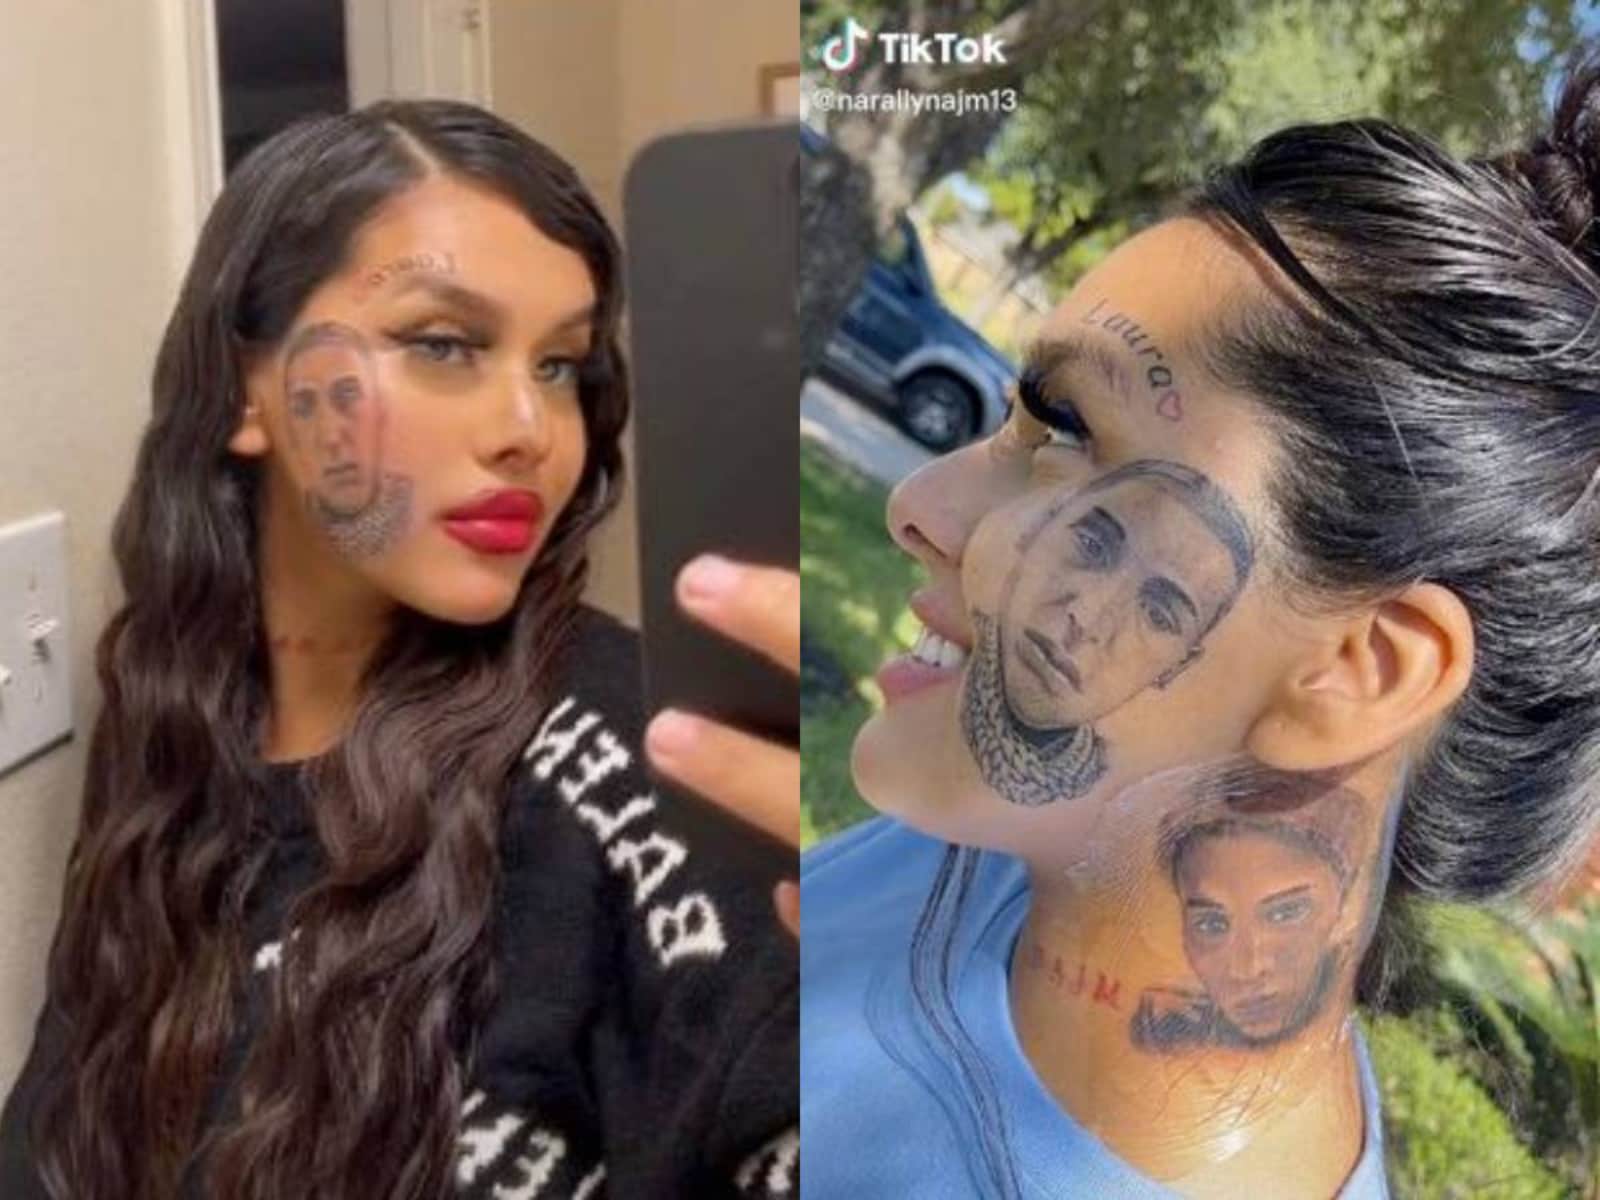 Woman, After Being Cheated On, Gets Ex-Partner's Face Tattooed On